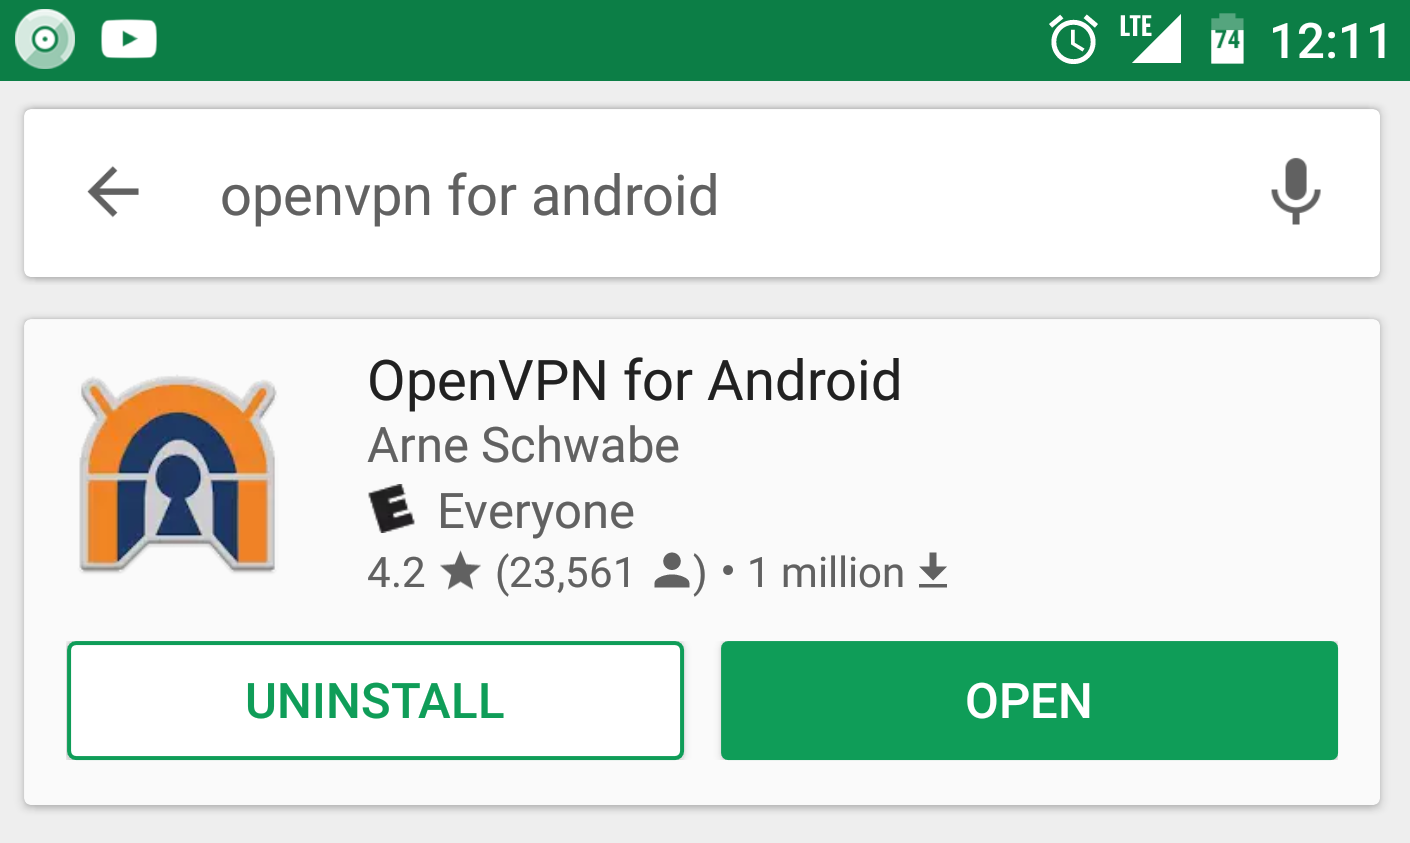 mapmedia charts openvpn for android